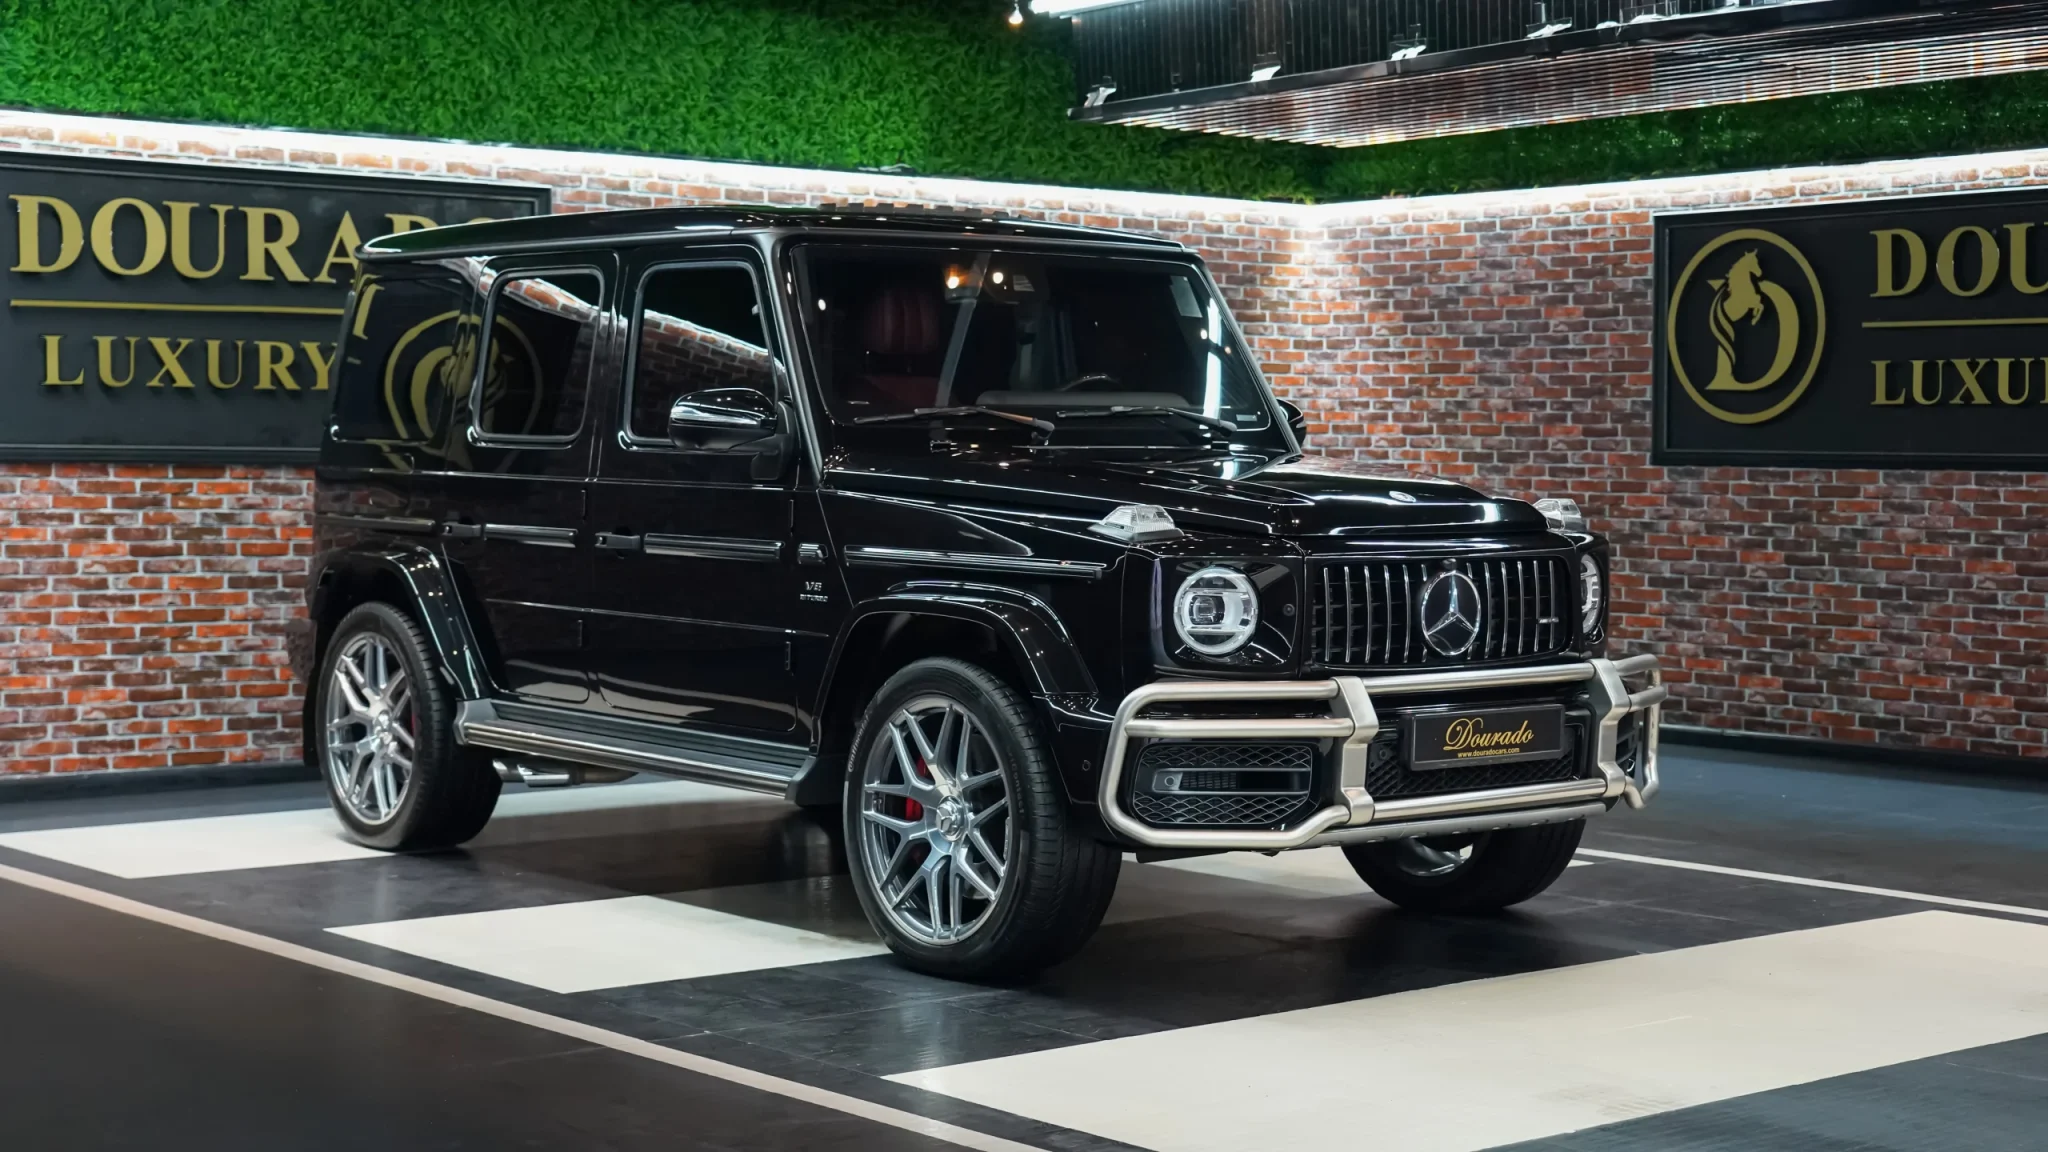 Mercedes G 63 AMG in Black Exterior Color Luxury Car for Sale in Dubai